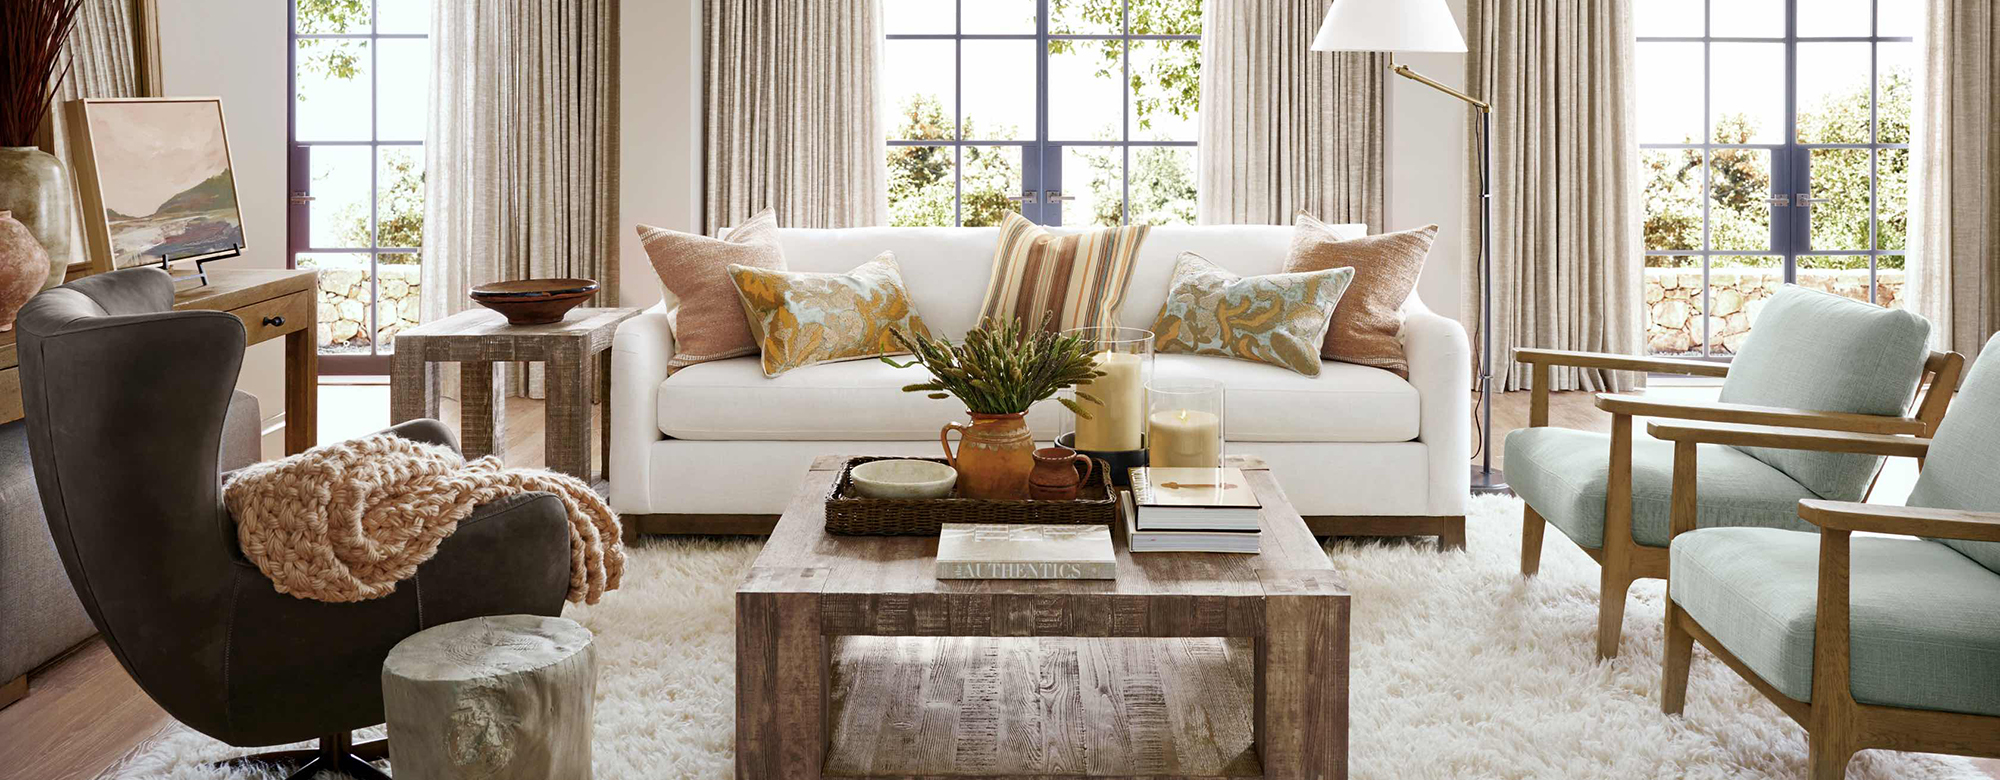 A Guide To Fall Home Decor & Decorating 